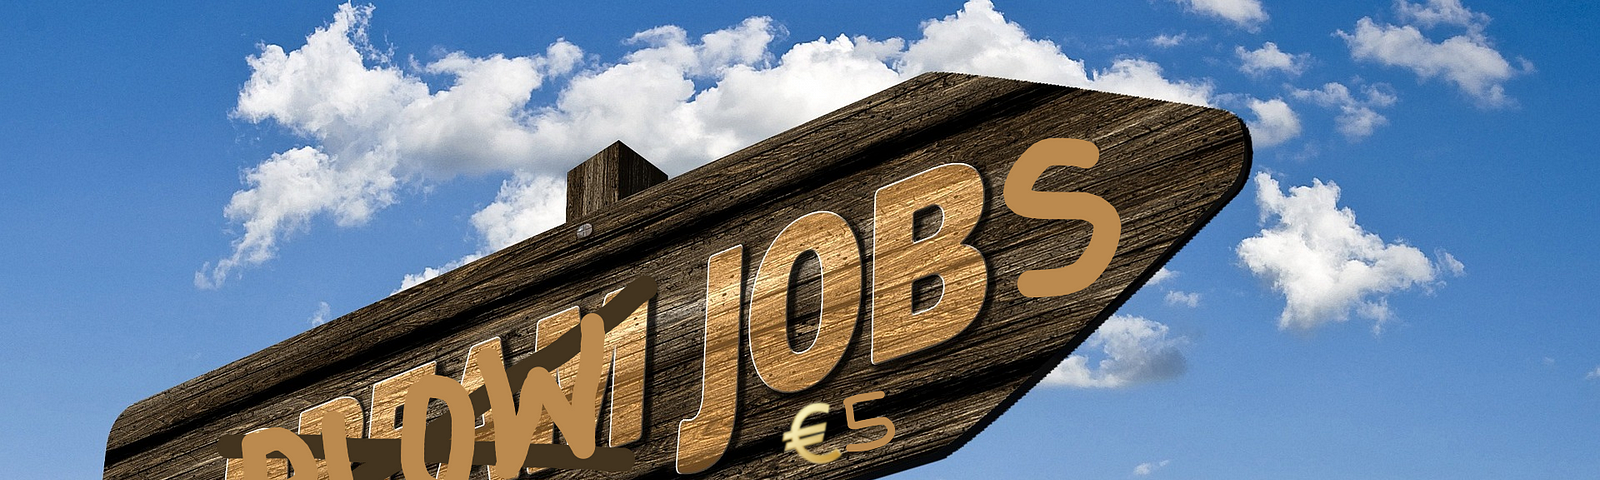 Image of a sign pointing toward the top right corner, with a clear blue sky in the background. The original image wrote ‘Dream Job’ but it was processed to ‘Blow Jobs / €5’.